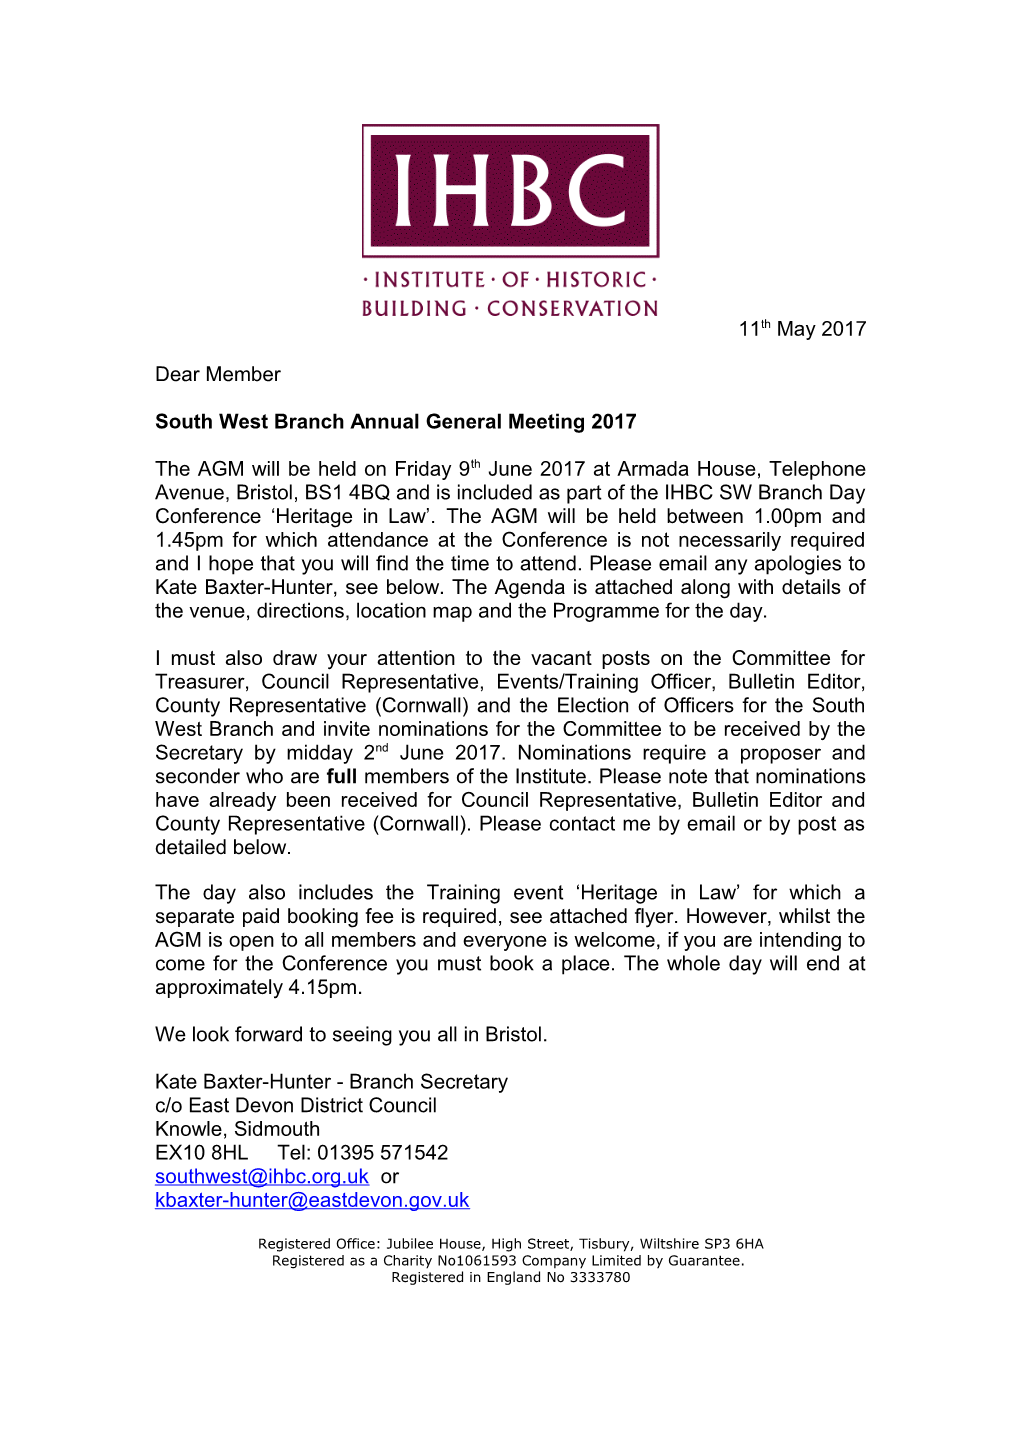 South West Branch Annual General Meeting 2017